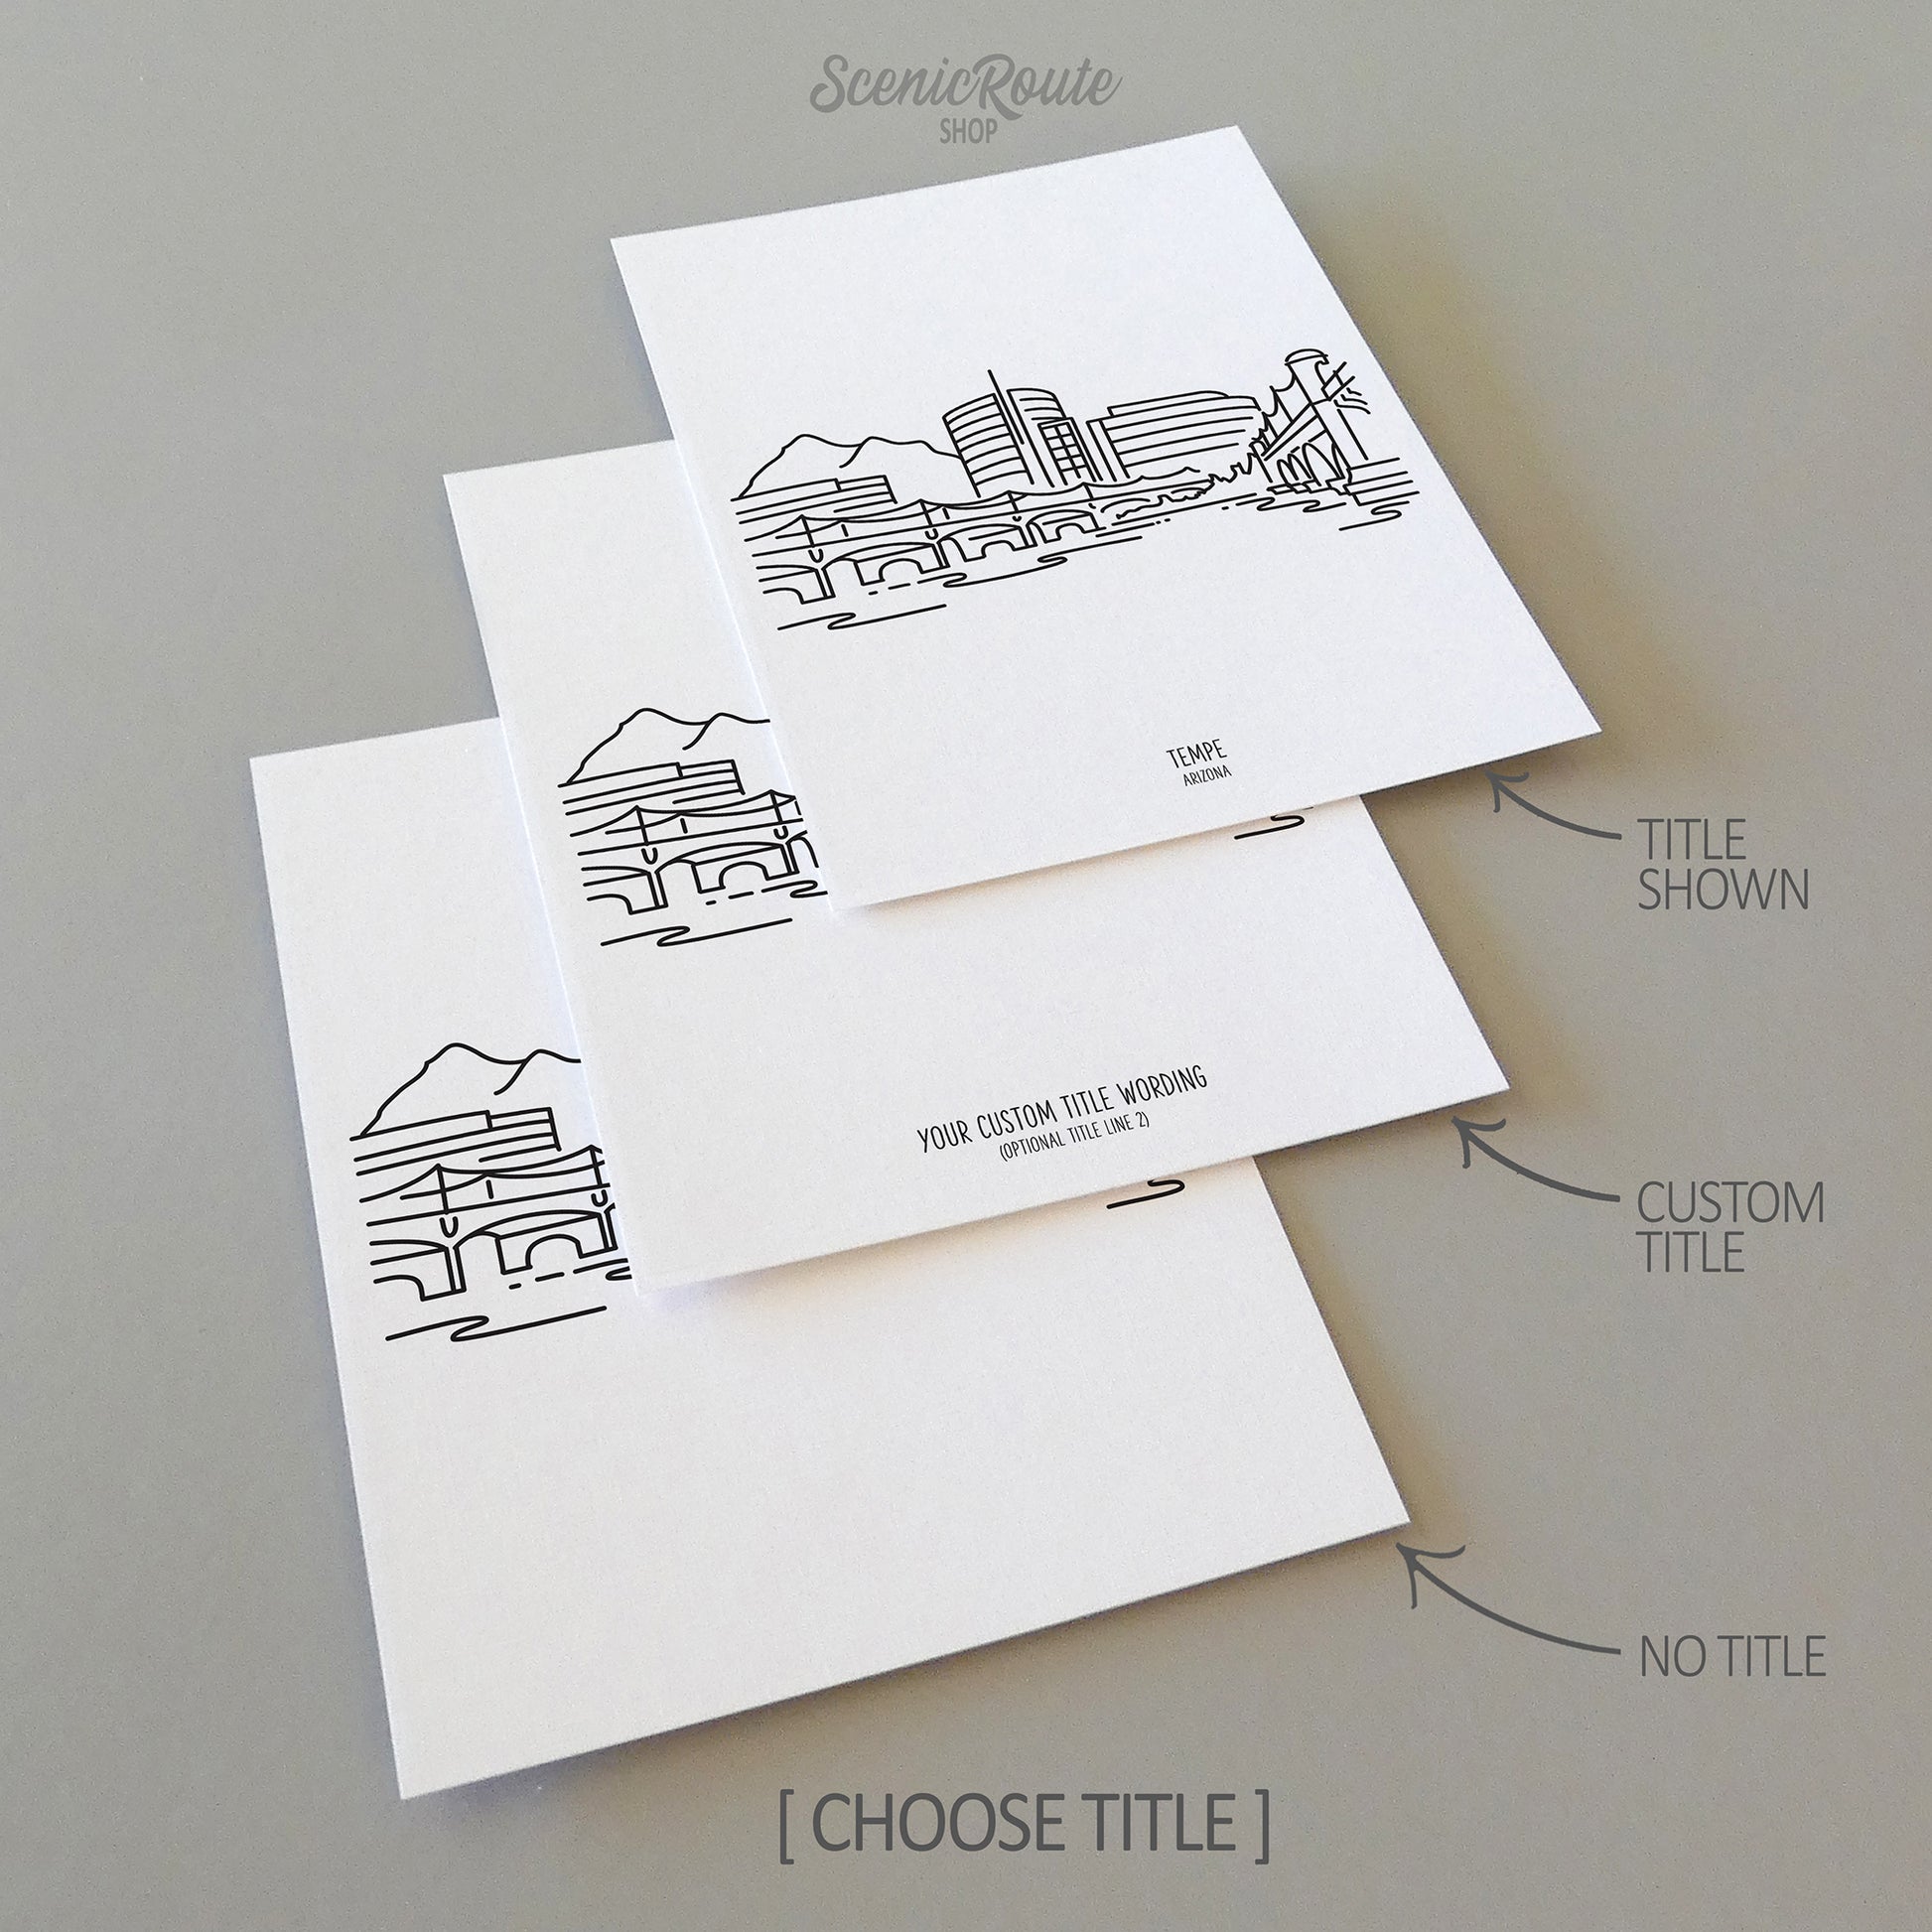 Three line art drawings of the Tempe Arizona Skyline on white linen paper with a gray background. The pieces are shown with title options that can be chosen and personalized.